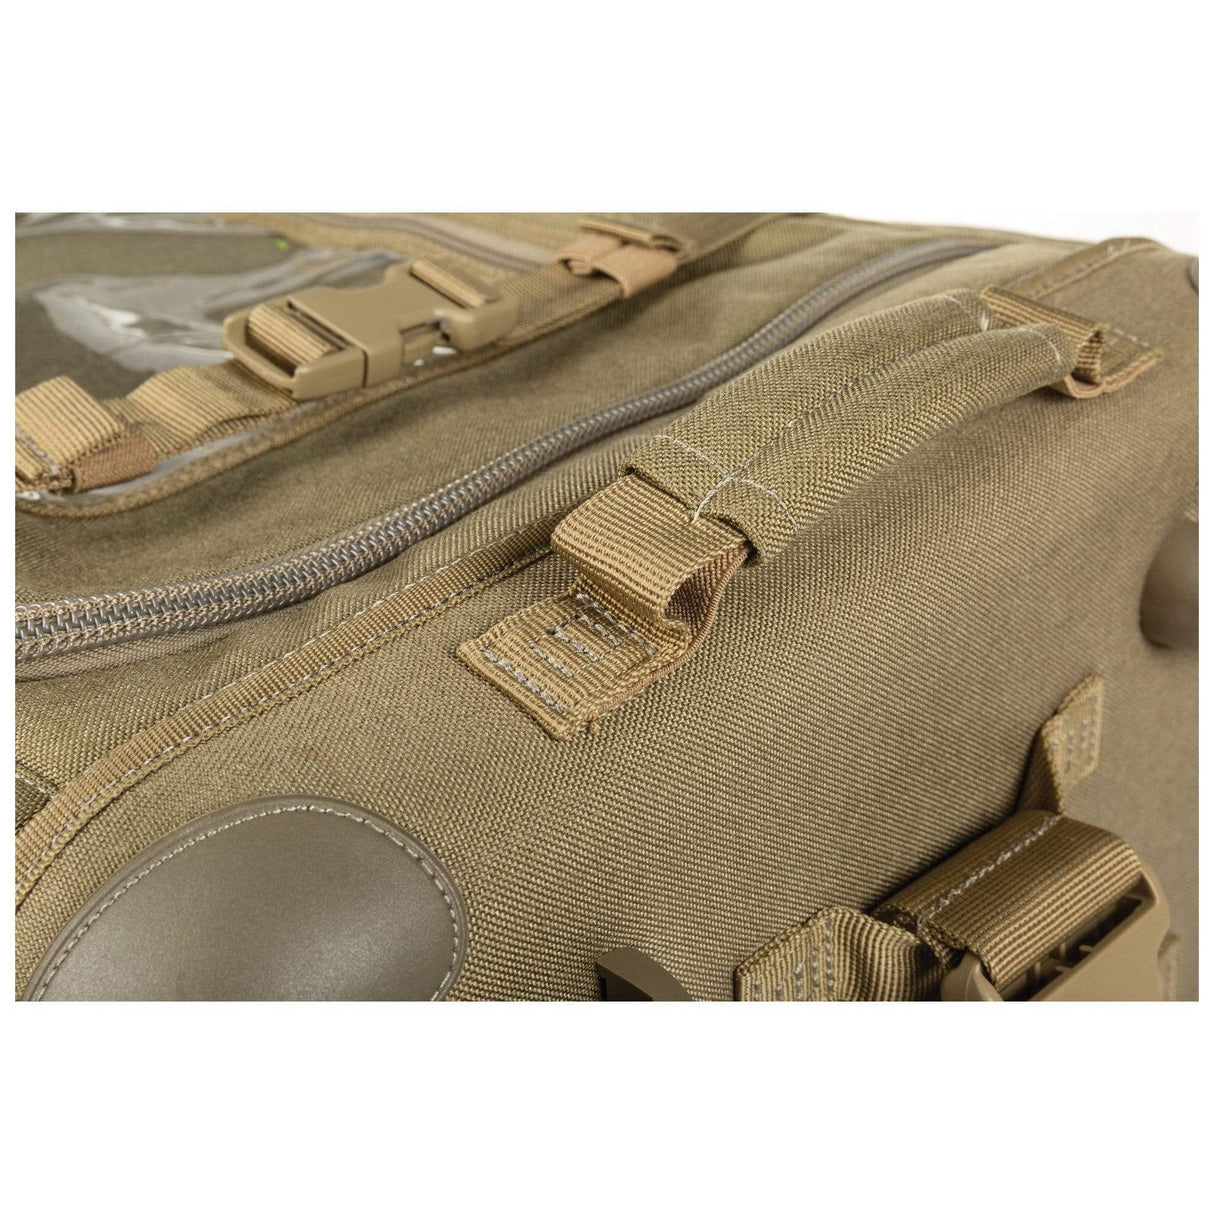 CAMS™ 3.0 190L - 5.11 Tactical Finland Store